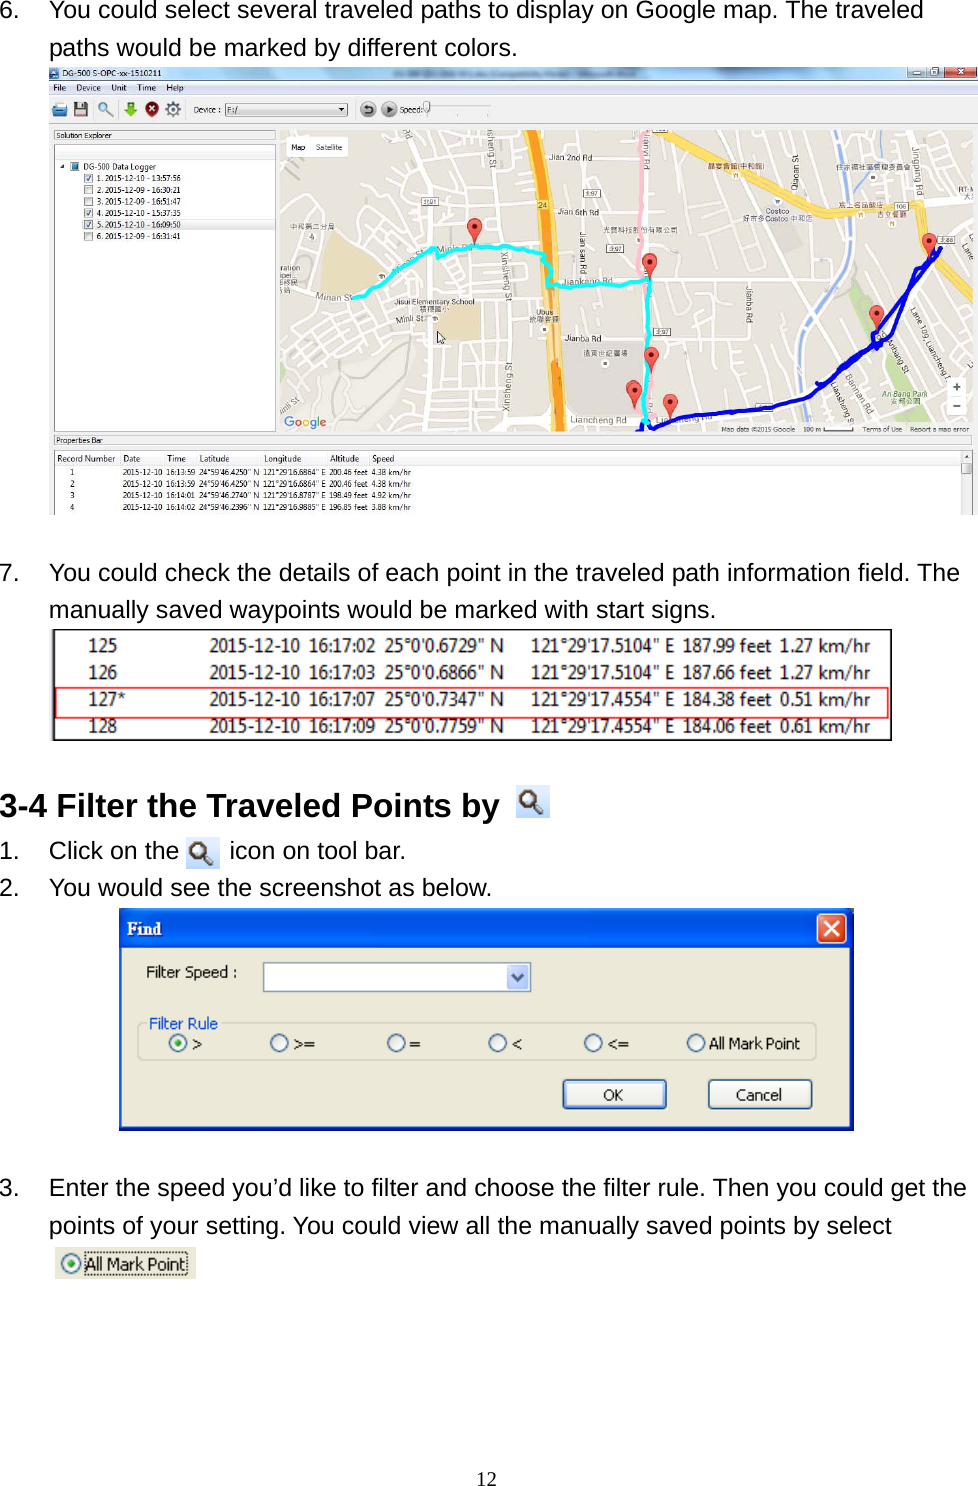  126.  You could select several traveled paths to display on Google map. The traveled paths would be marked by different colors.   7.  You could check the details of each point in the traveled path information field. The manually saved waypoints would be marked with start signs.     3-4 Filter the Traveled Points by   1.  Click on the    icon on tool bar.      2.  You would see the screenshot as below.   3.  Enter the speed you’d like to filter and choose the filter rule. Then you could get the points of your setting. You could view all the manually saved points by select    